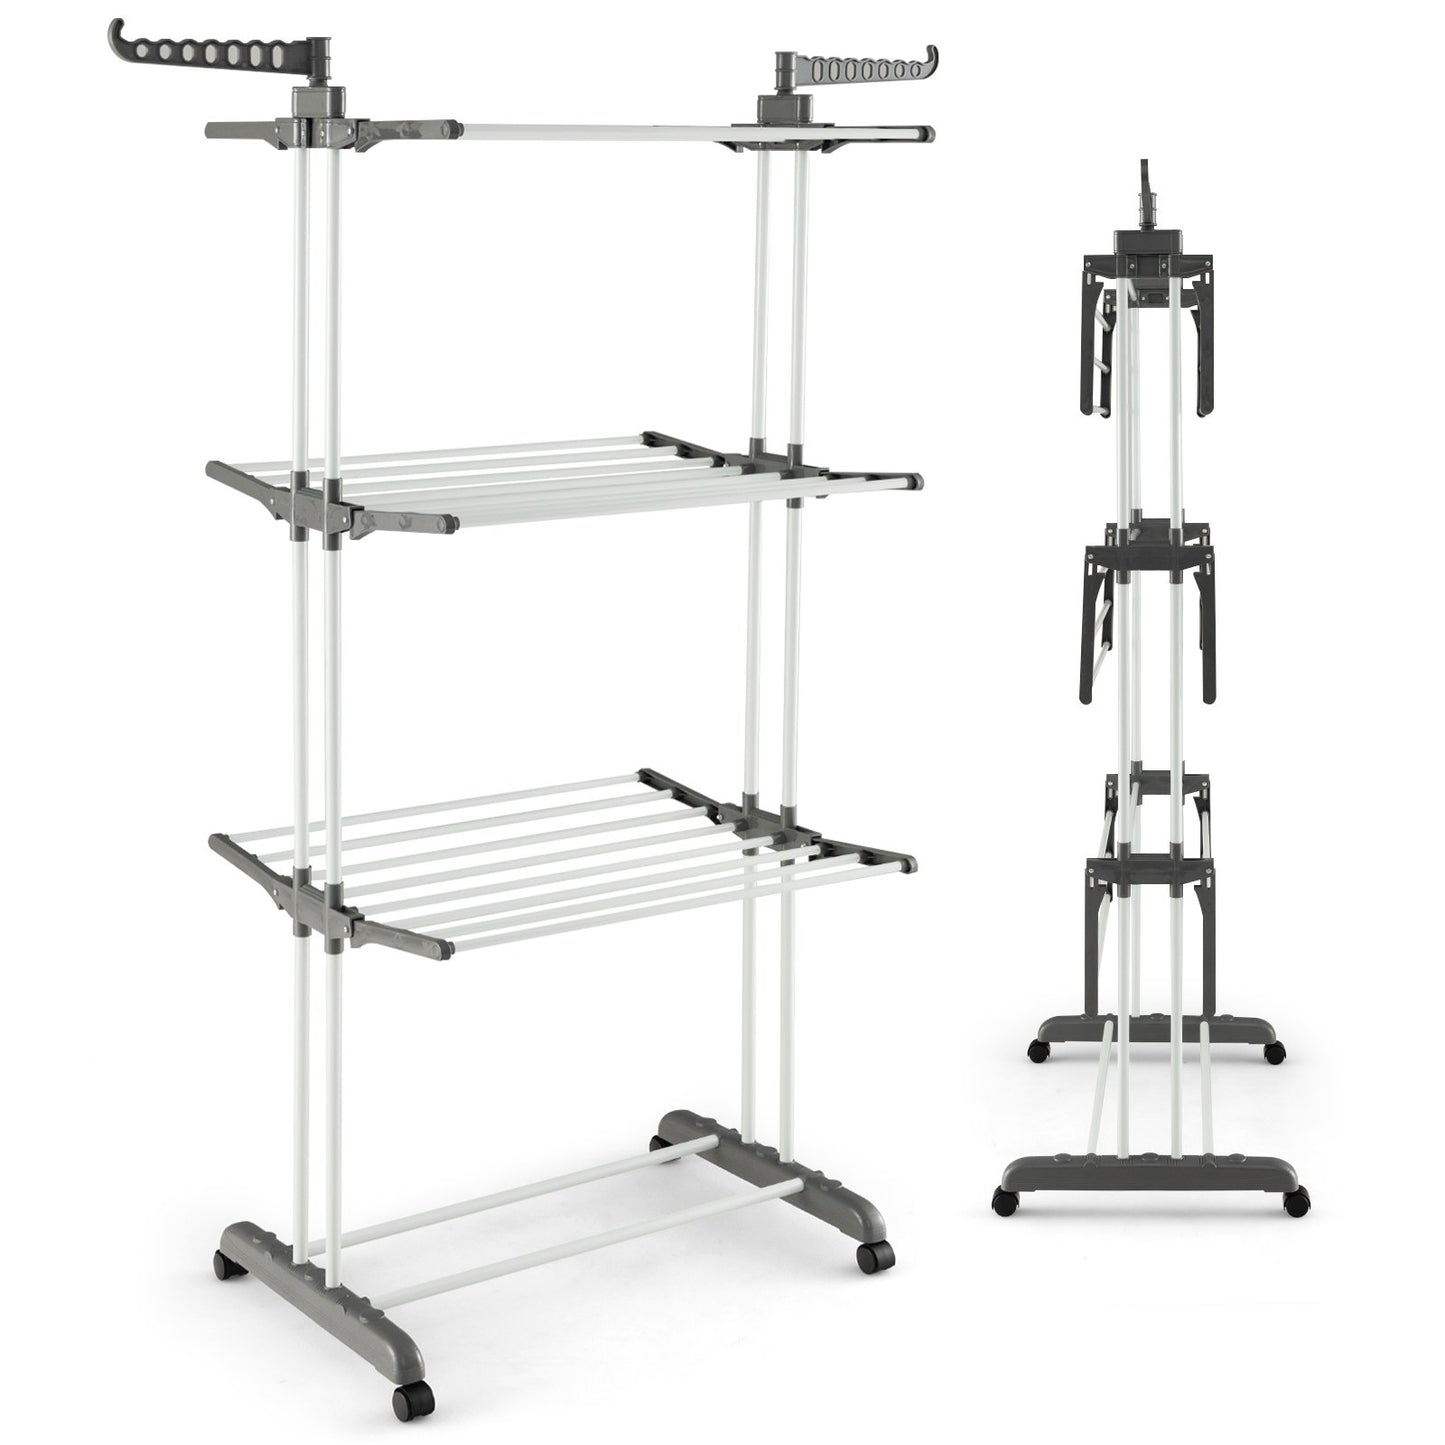 4-tier Clothes Drying Rack with Rotatable Side Wings and Collapsible Shelves, Gray